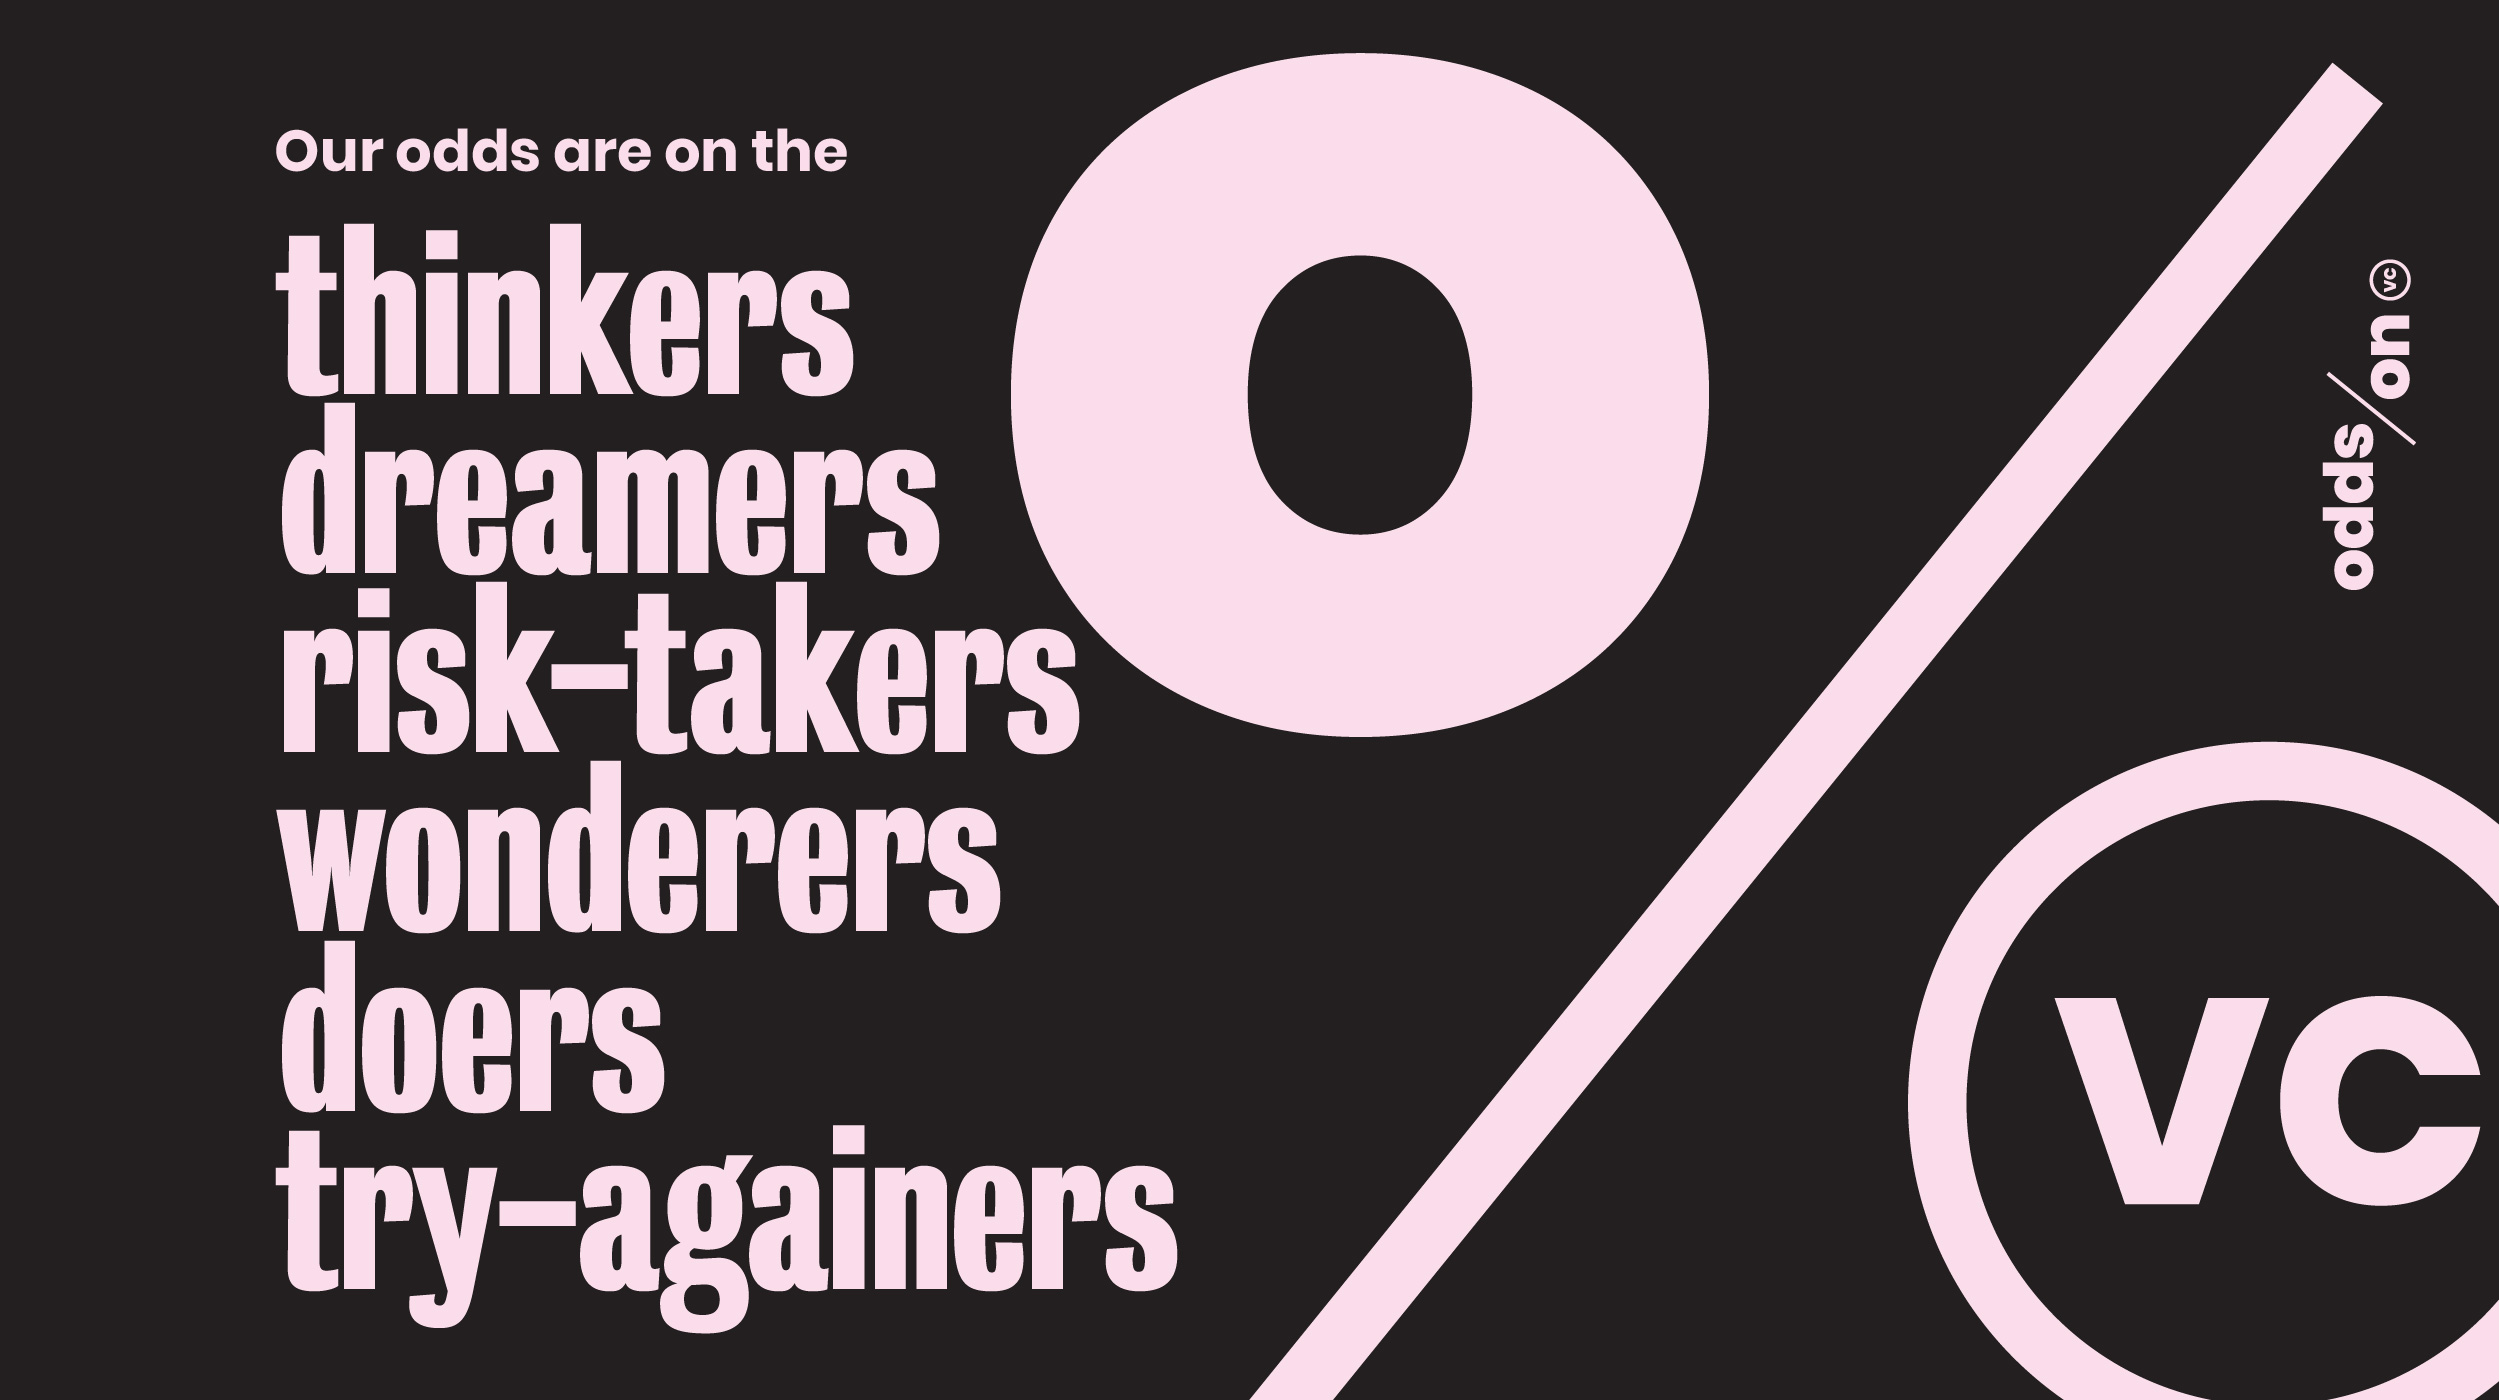 Our odds are on the thinkers, dreamers, risk takers, wonderers, doers, and try againers.